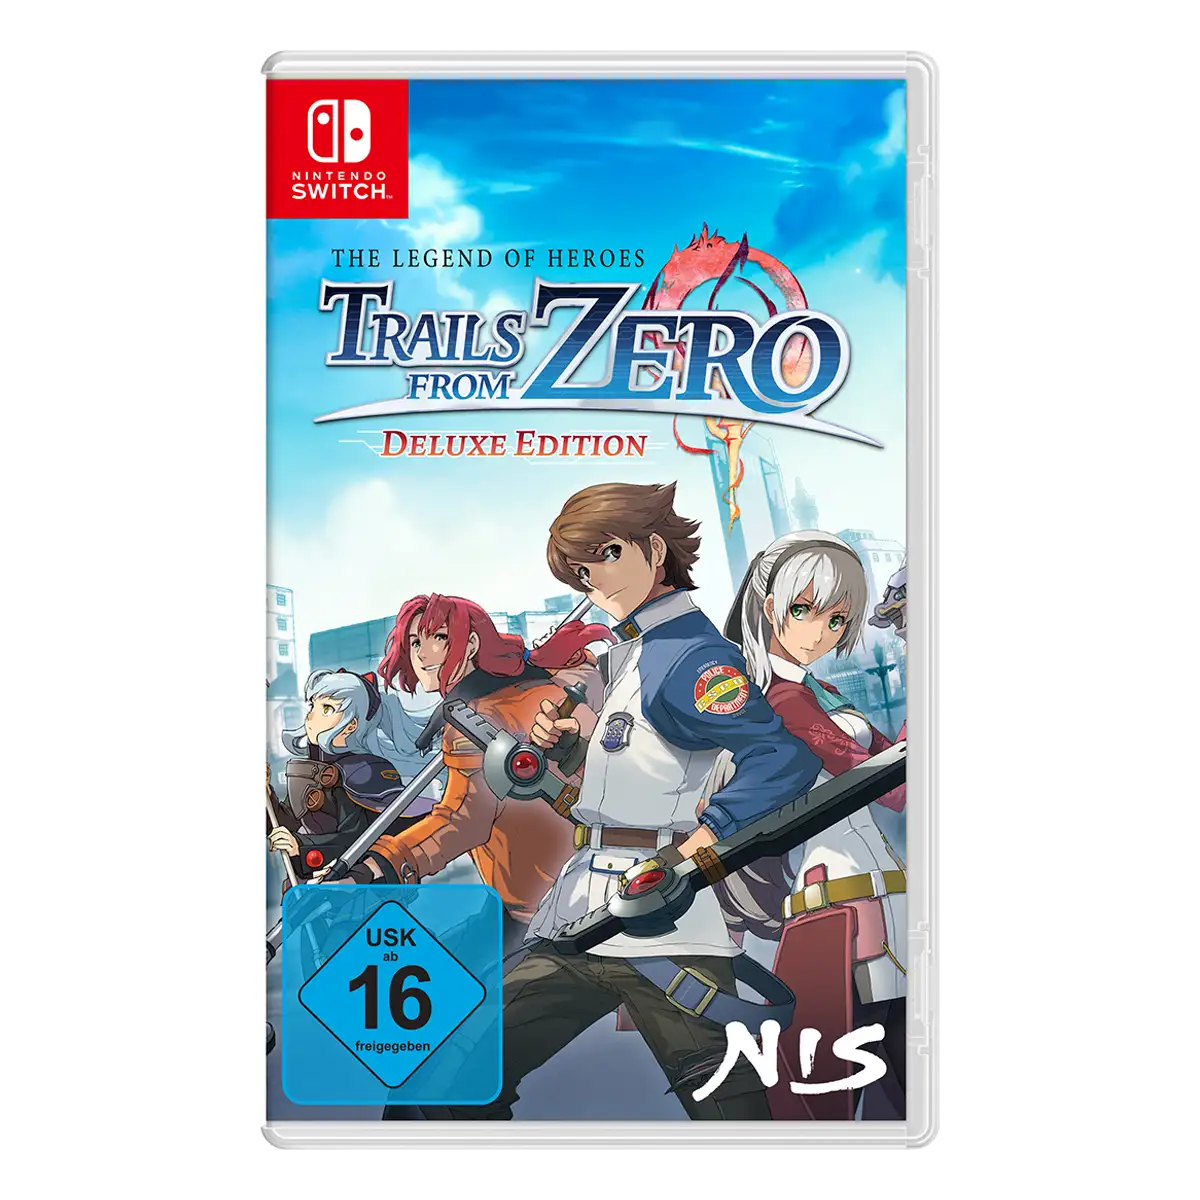 The Legend of Heroes: Trails from Zero Deluxe Edition (Switch)